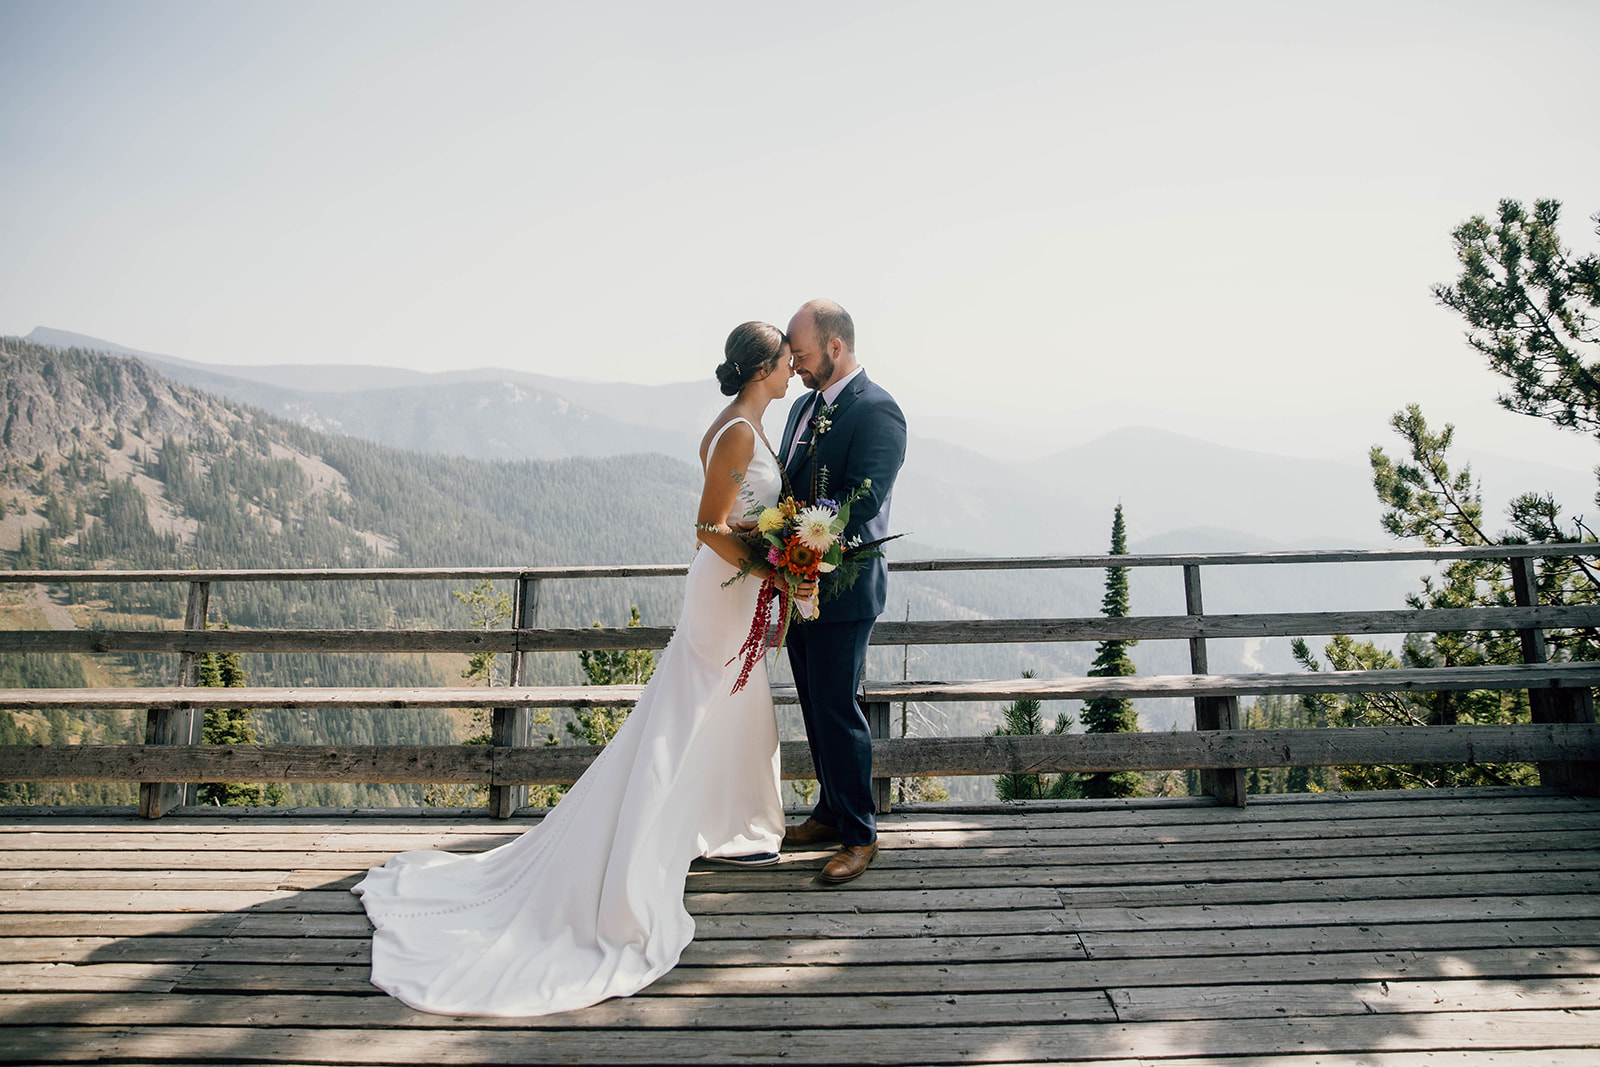 Snowball Ski Resort Wedding in Missoula, Montana: Jordan & Melissa by Abigail Maki Photography. Includes bridal fashion, wedding inspiration and wedding details. Book your Montana wedding and browse the blog for more inspiration